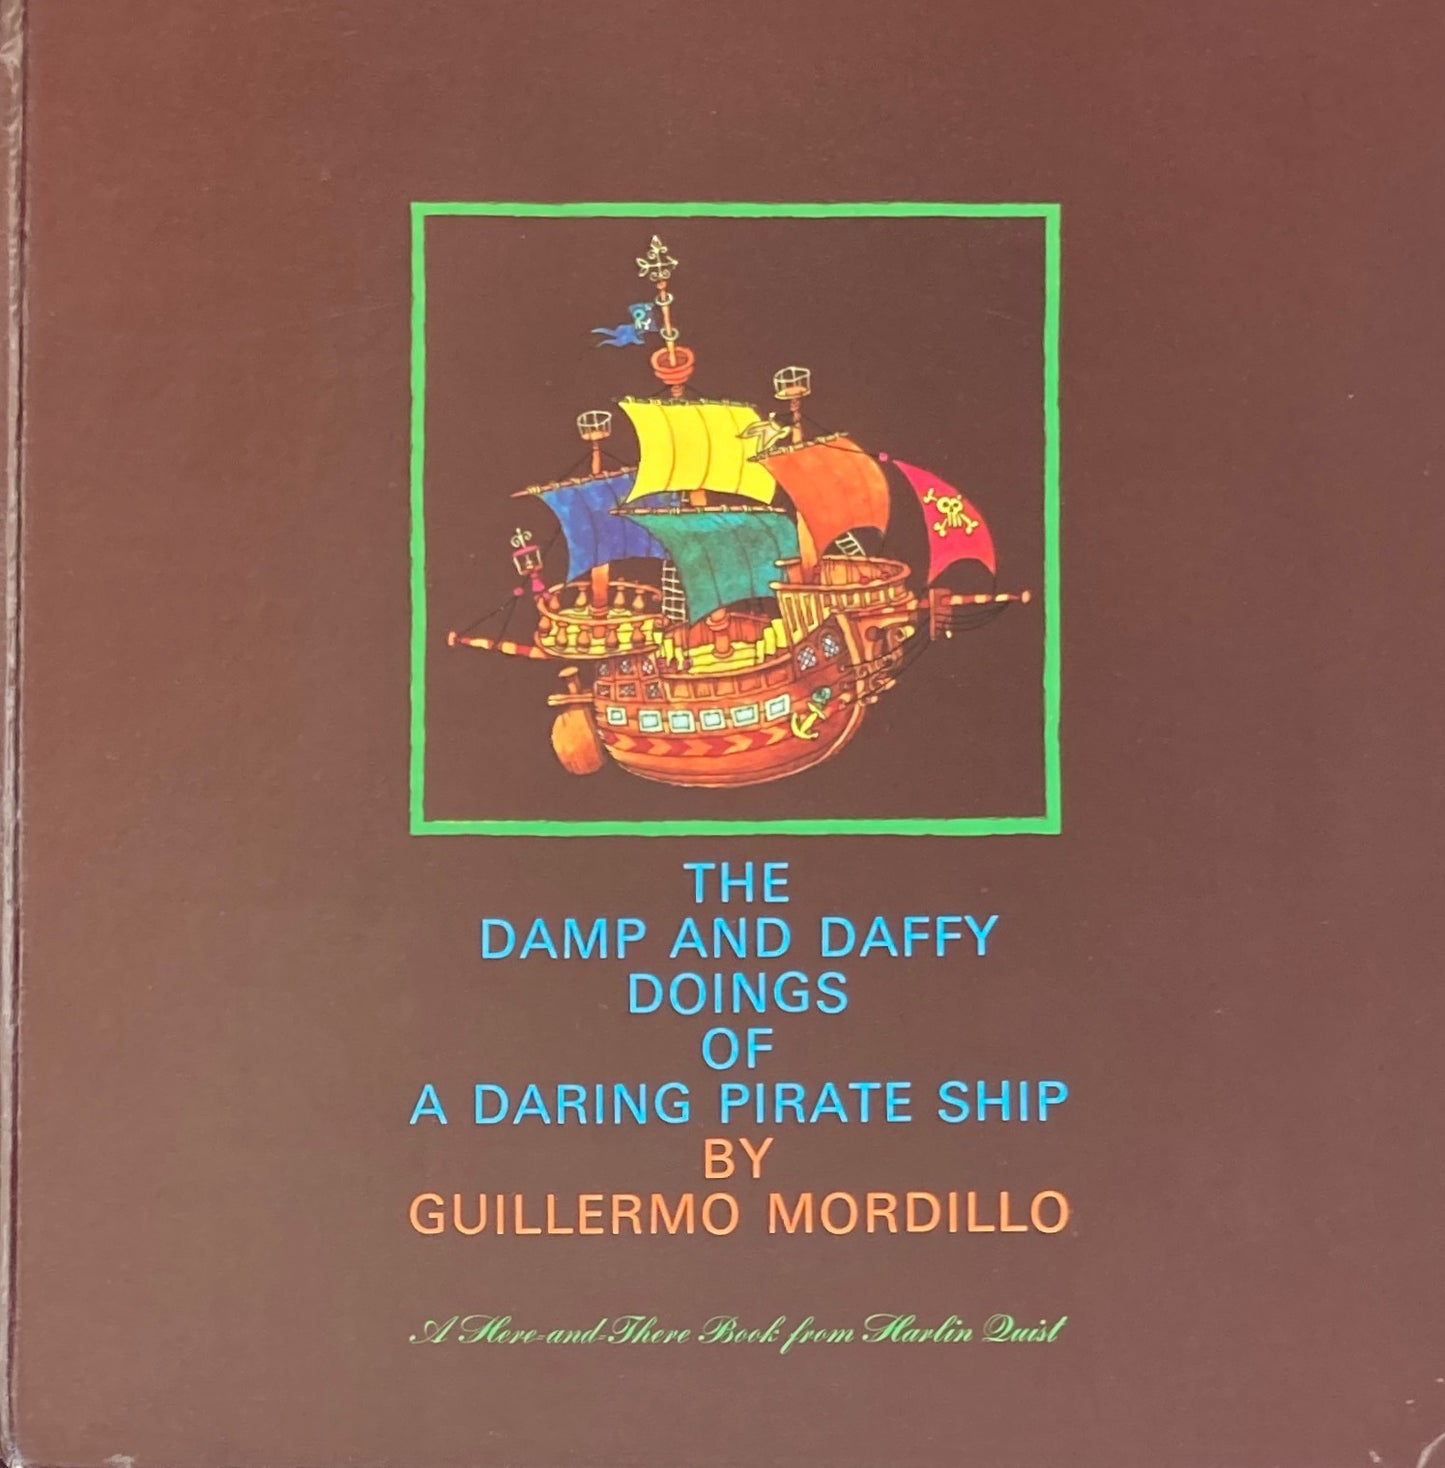 The Damp and Daffy Doing of a Daring Pirate Ship ギレルモ・モルディロ　Guillermo Mordillo